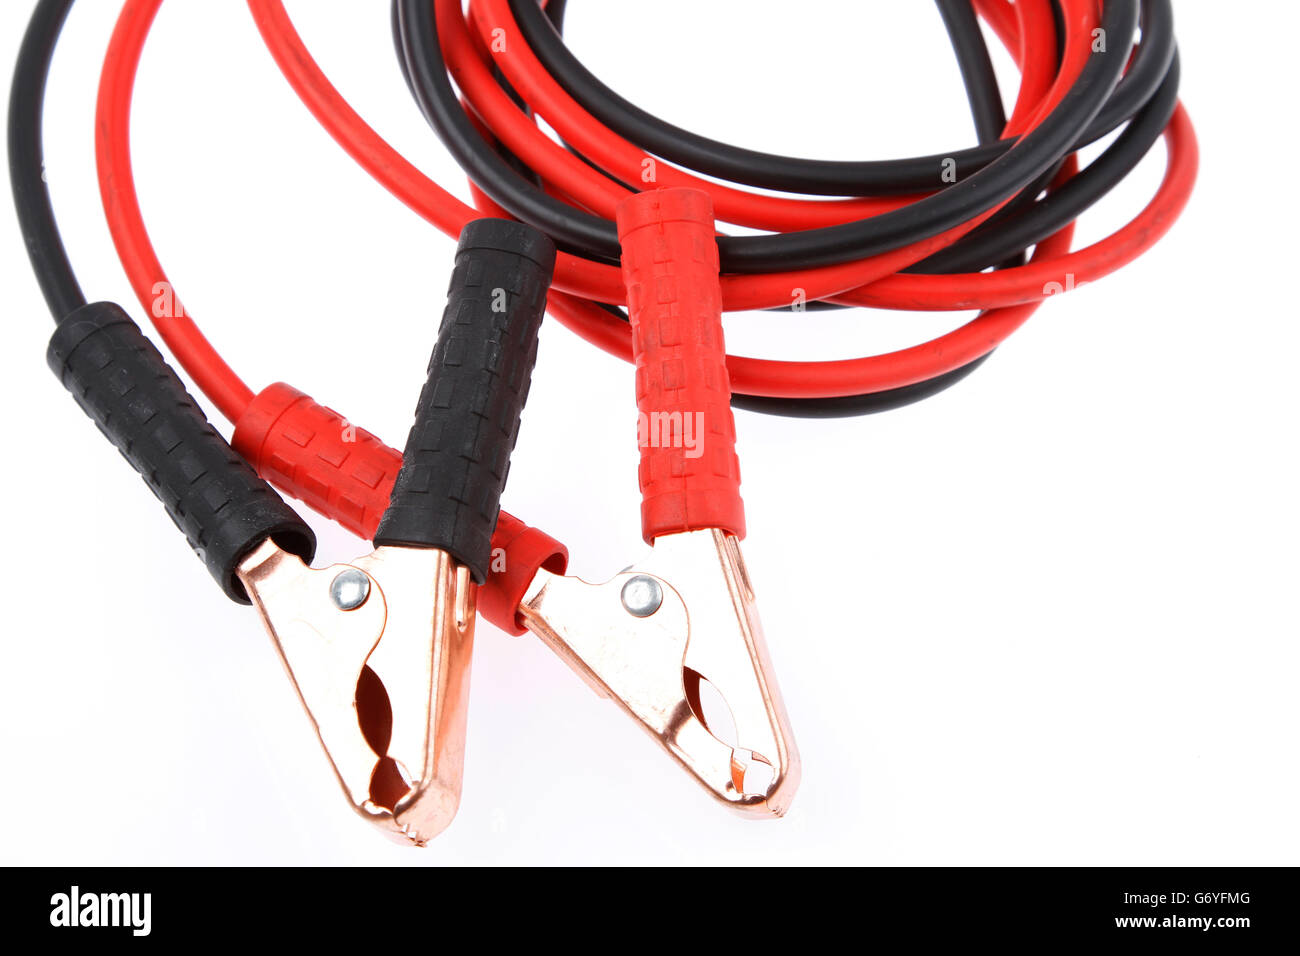 Jumper cables on plain background Stock Photo